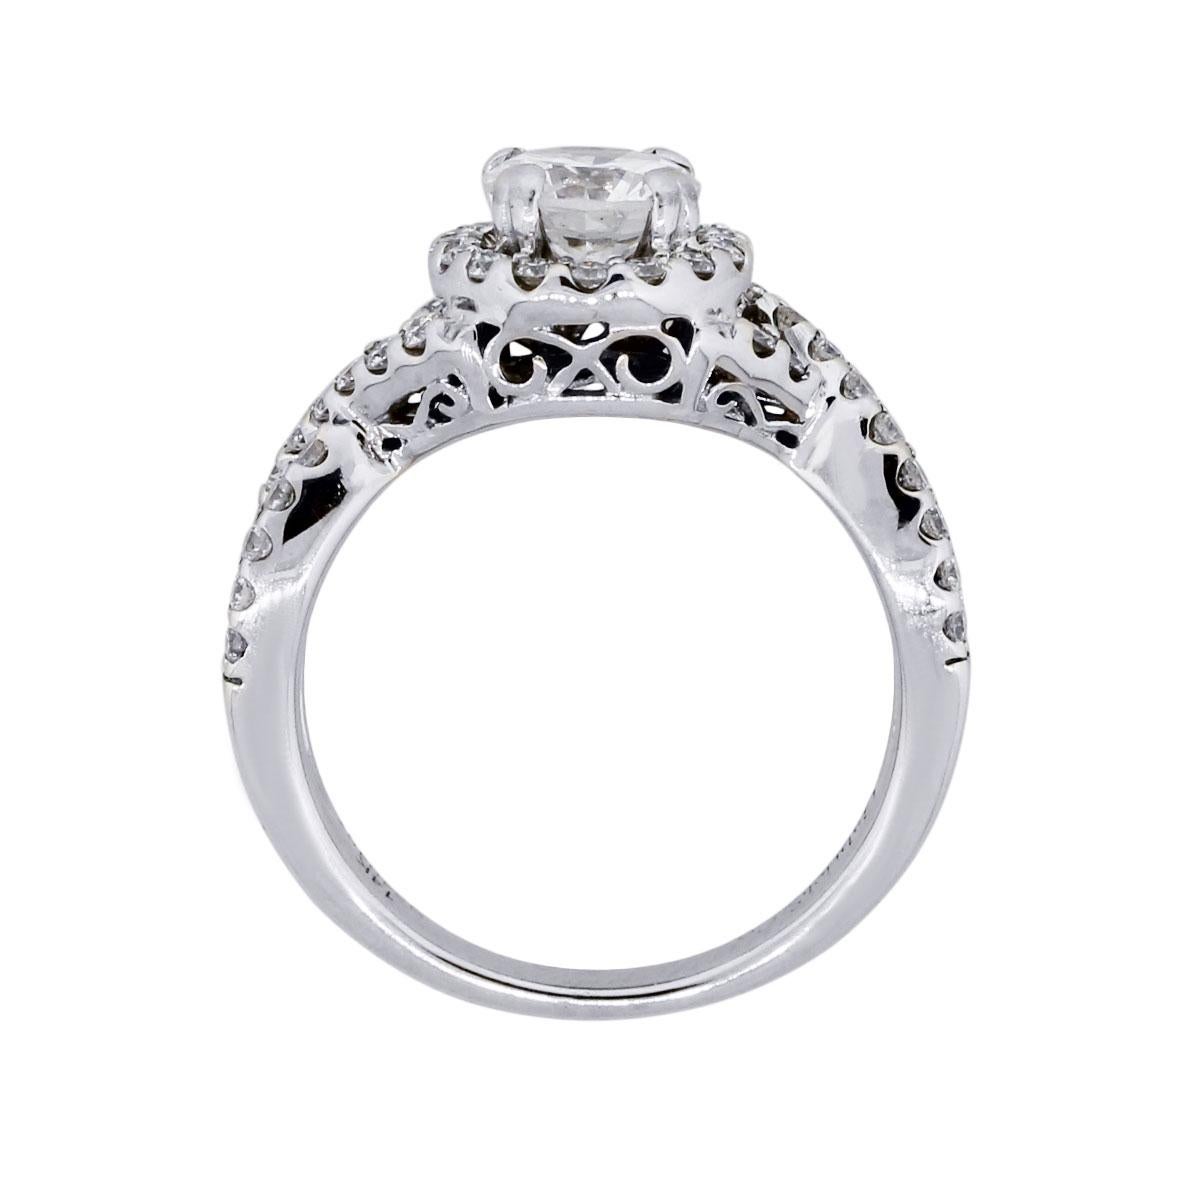 Material: 14k white gold
Main Diamond Details: Round brilliant diamond approximately 0.90ct. Diamond is H in color and I1 in clarity
Mounting Diamond Details: Approximately 0.75ctw of round brilliant diamonds.
Ring Size: 6.5 (can be sized)
Ring